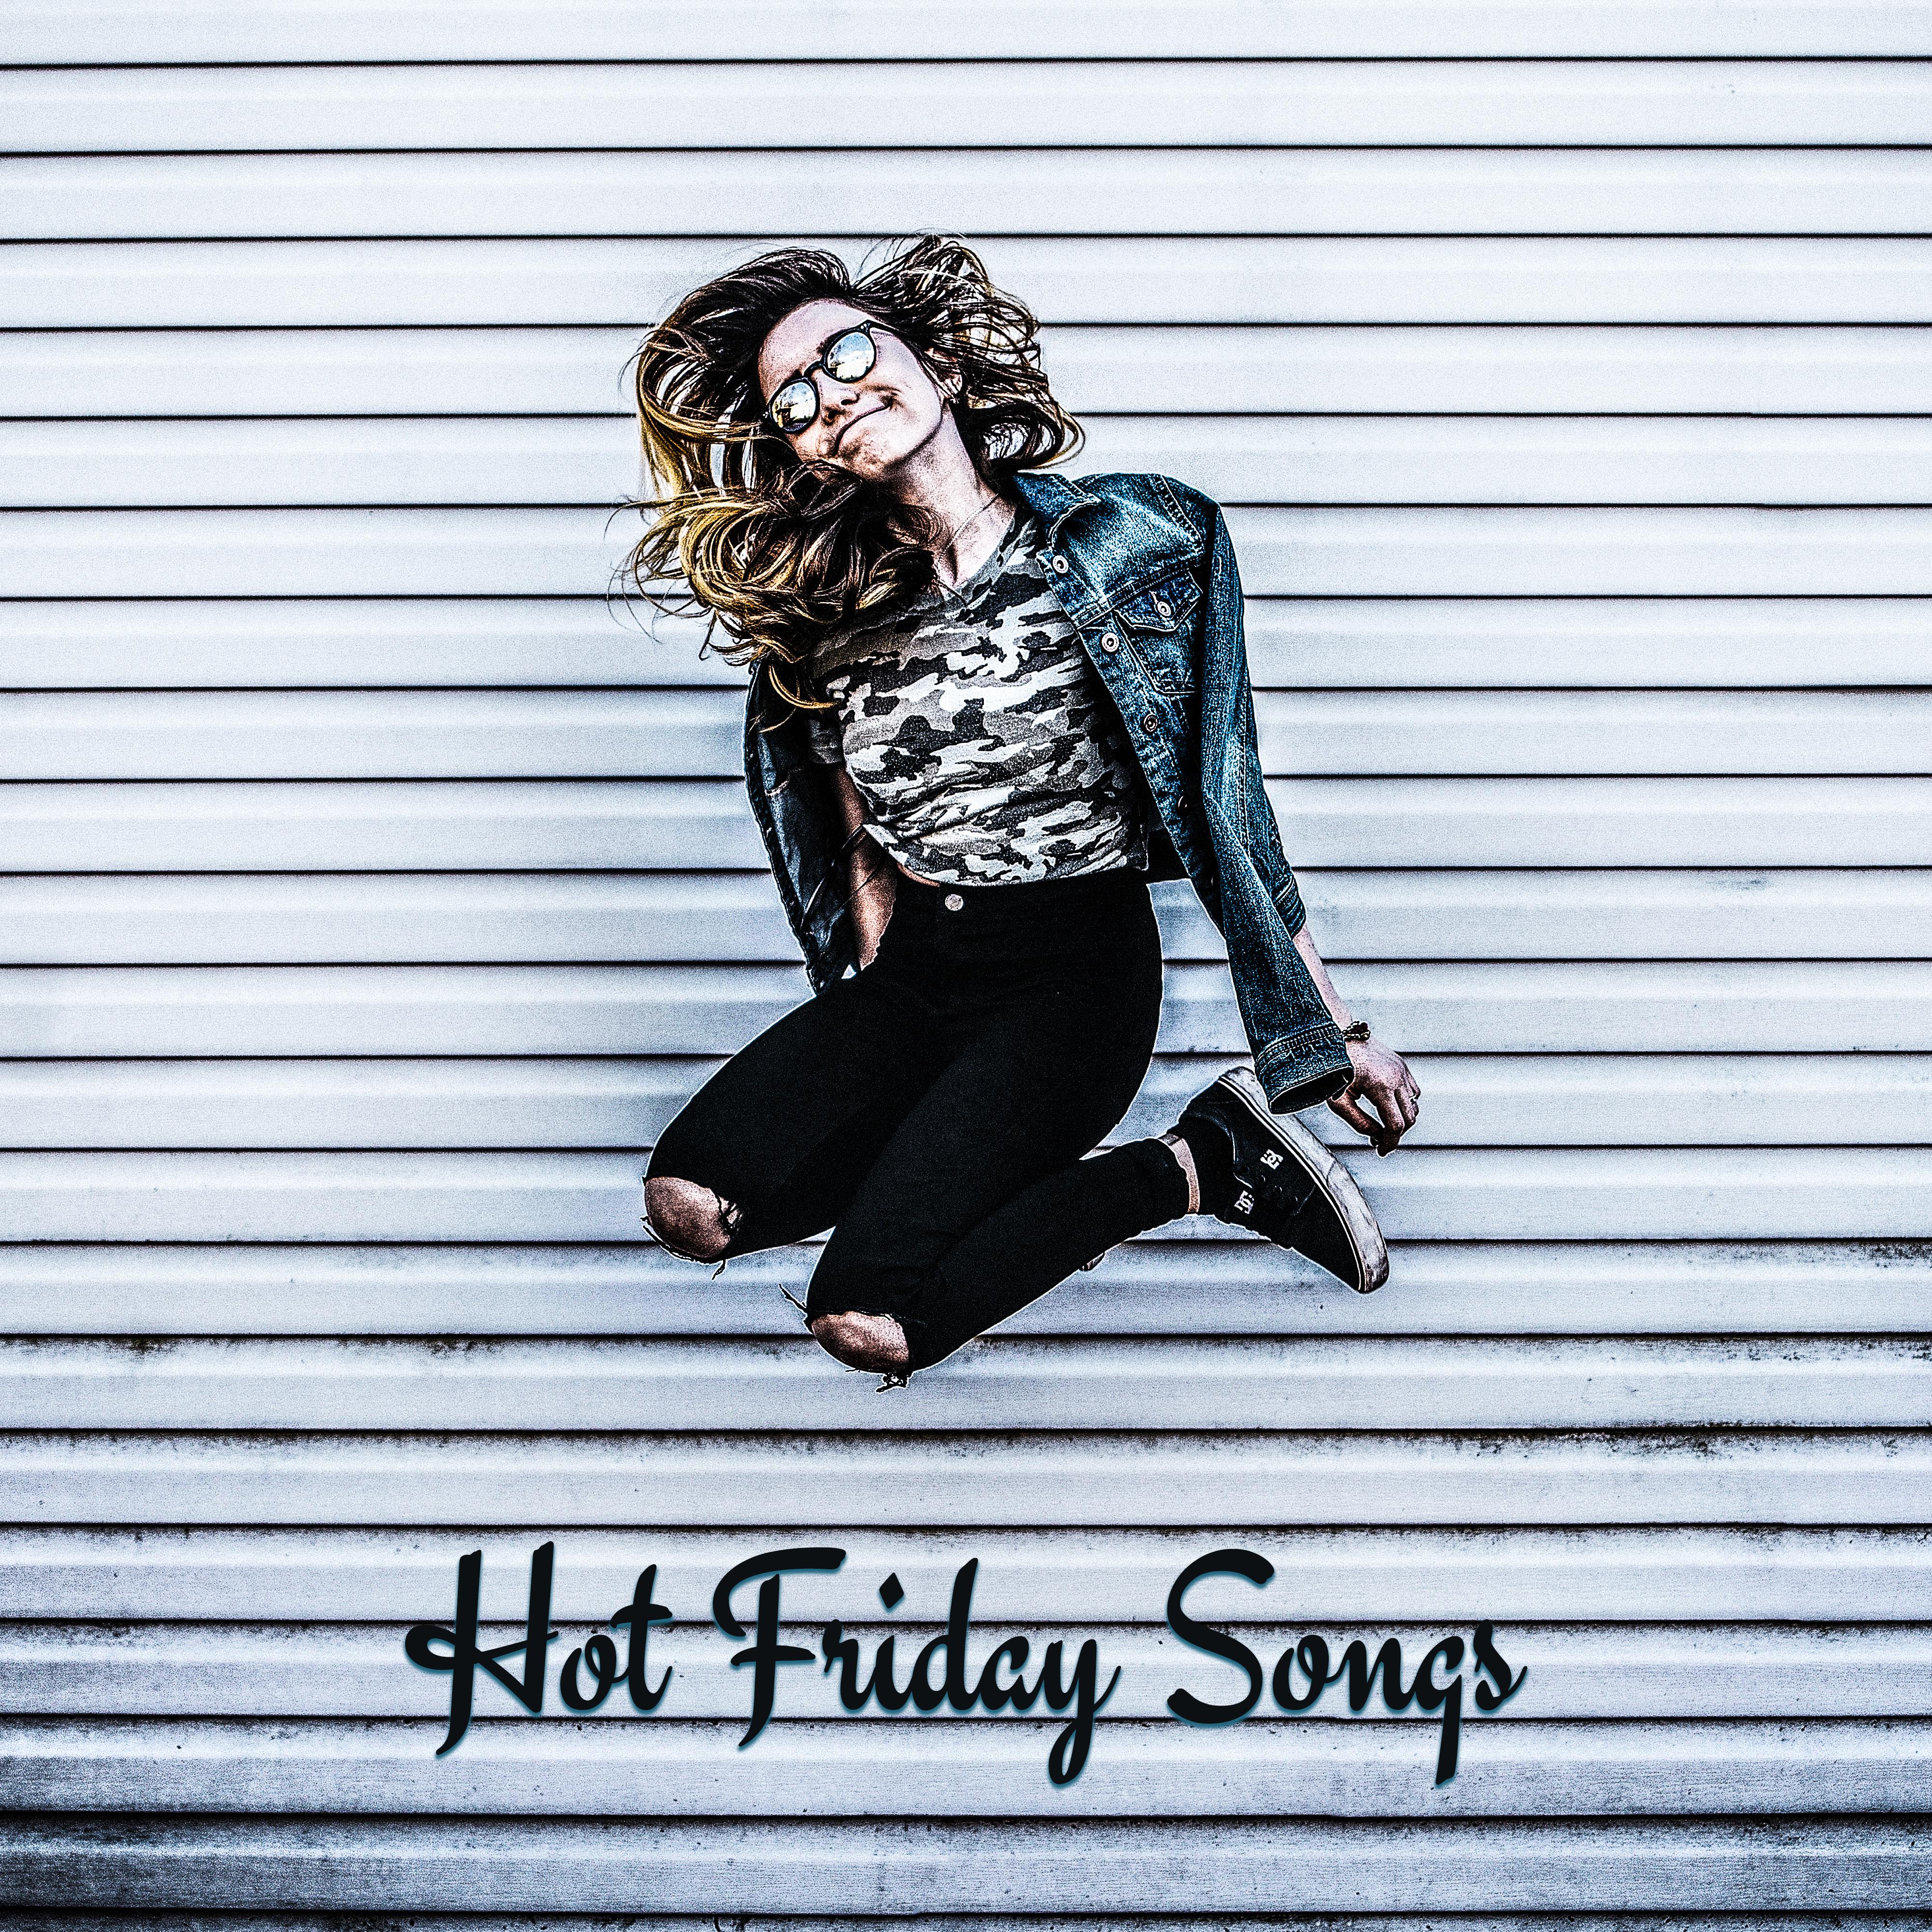 Hot Friday Songs  Chill Out Music, Party Hits, Relax After Work, Electronic Vibes